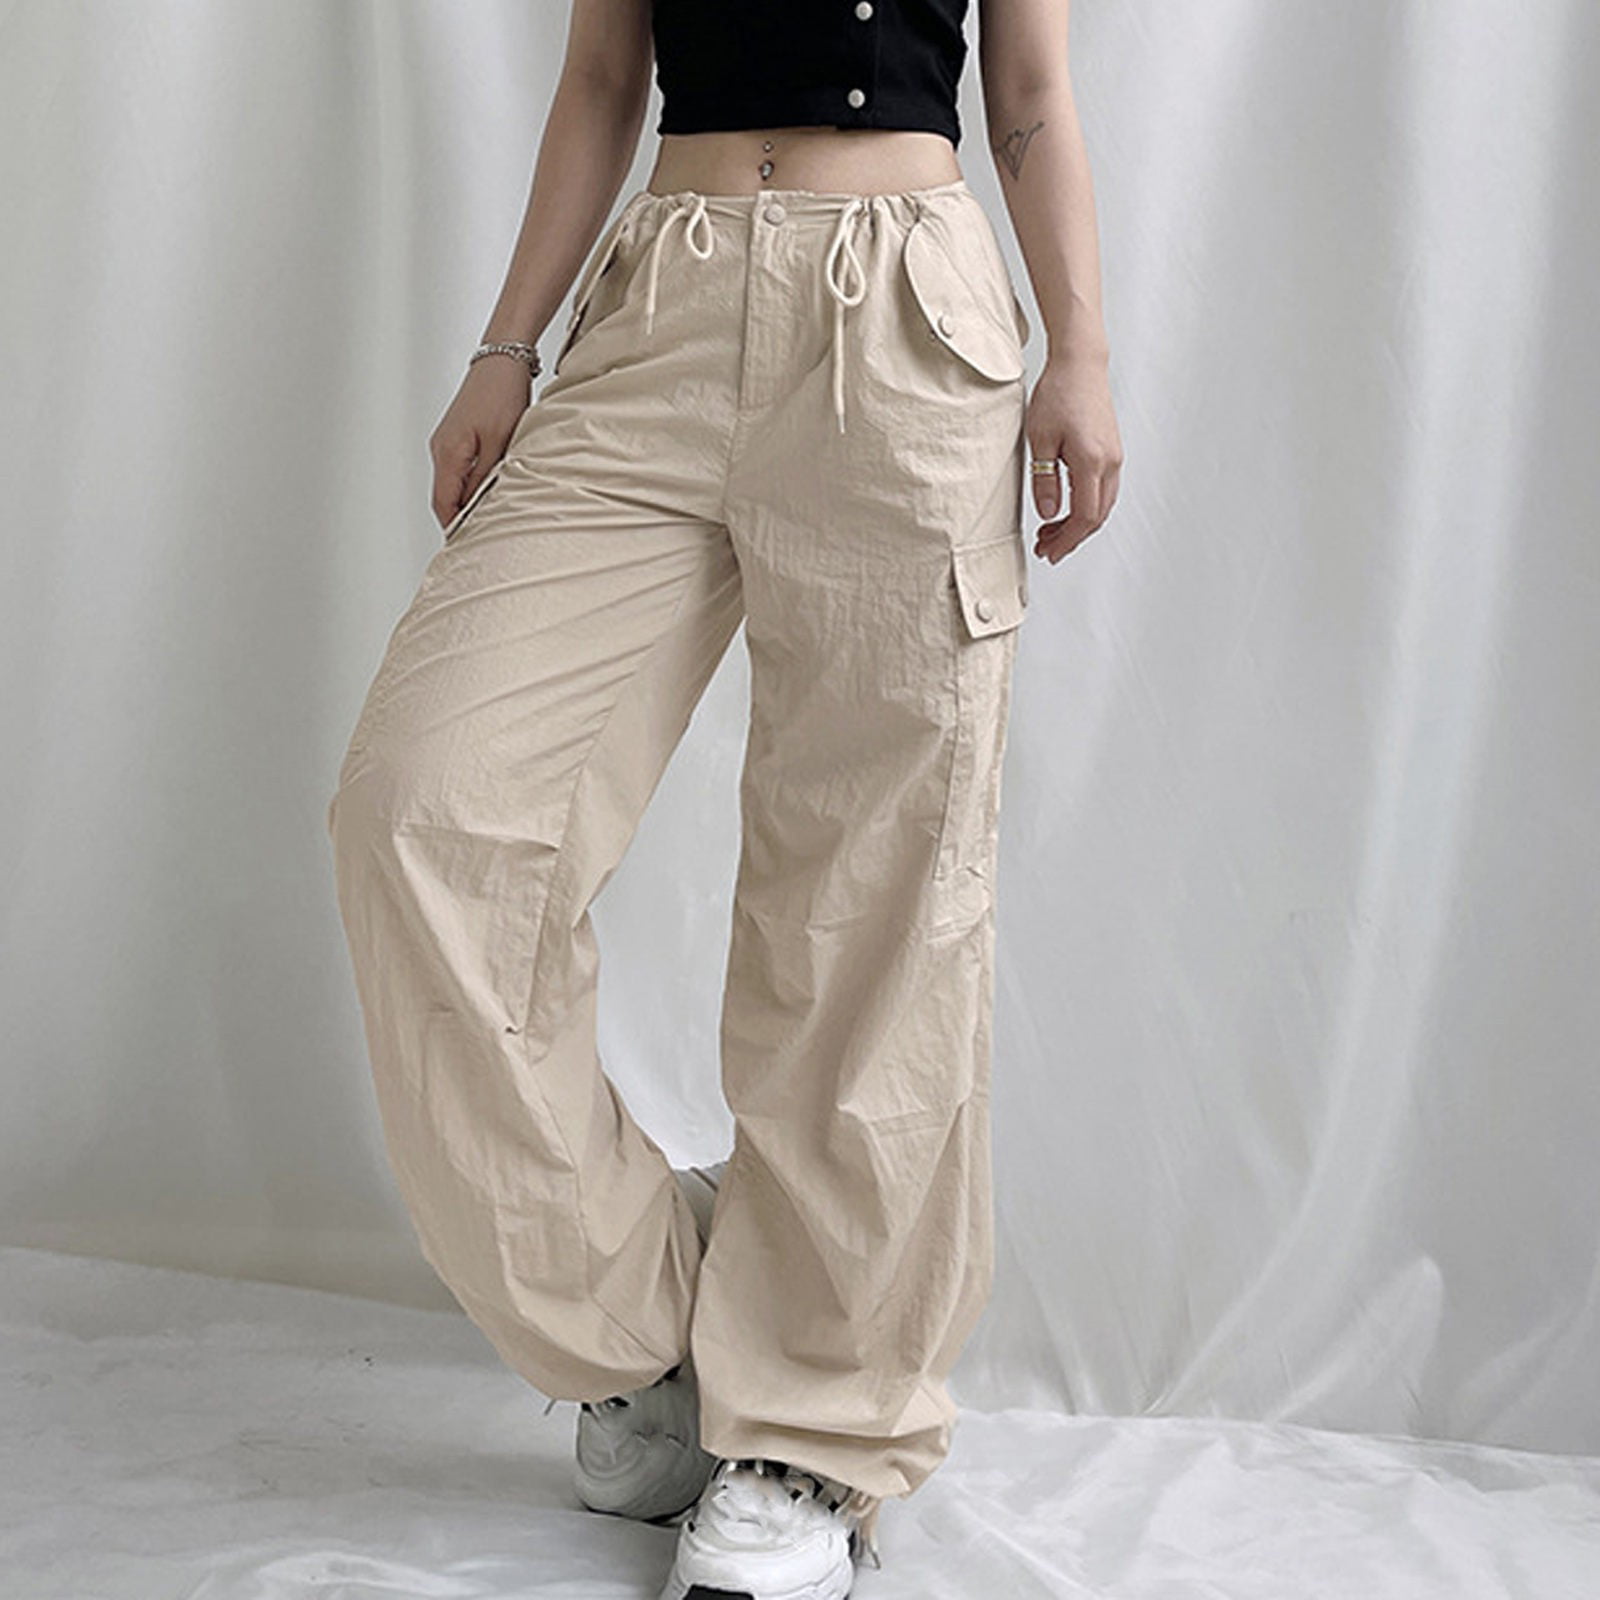 NILLLY Cargo Pants for Women Fashion Women's Solid Color Cargo